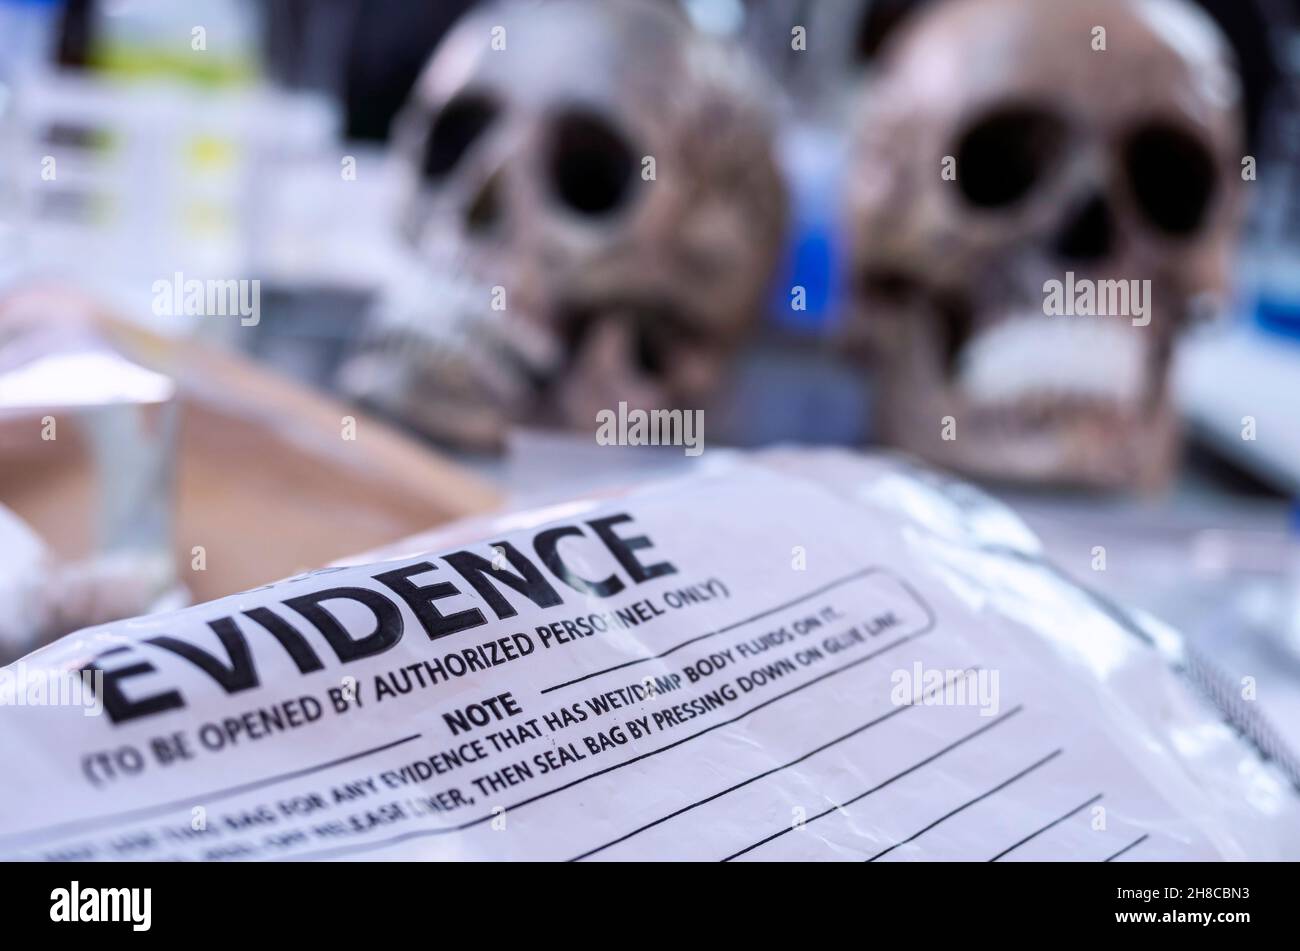 Several human skulls next to bag of evidence to determine DNA in forensic lab Stock Photo